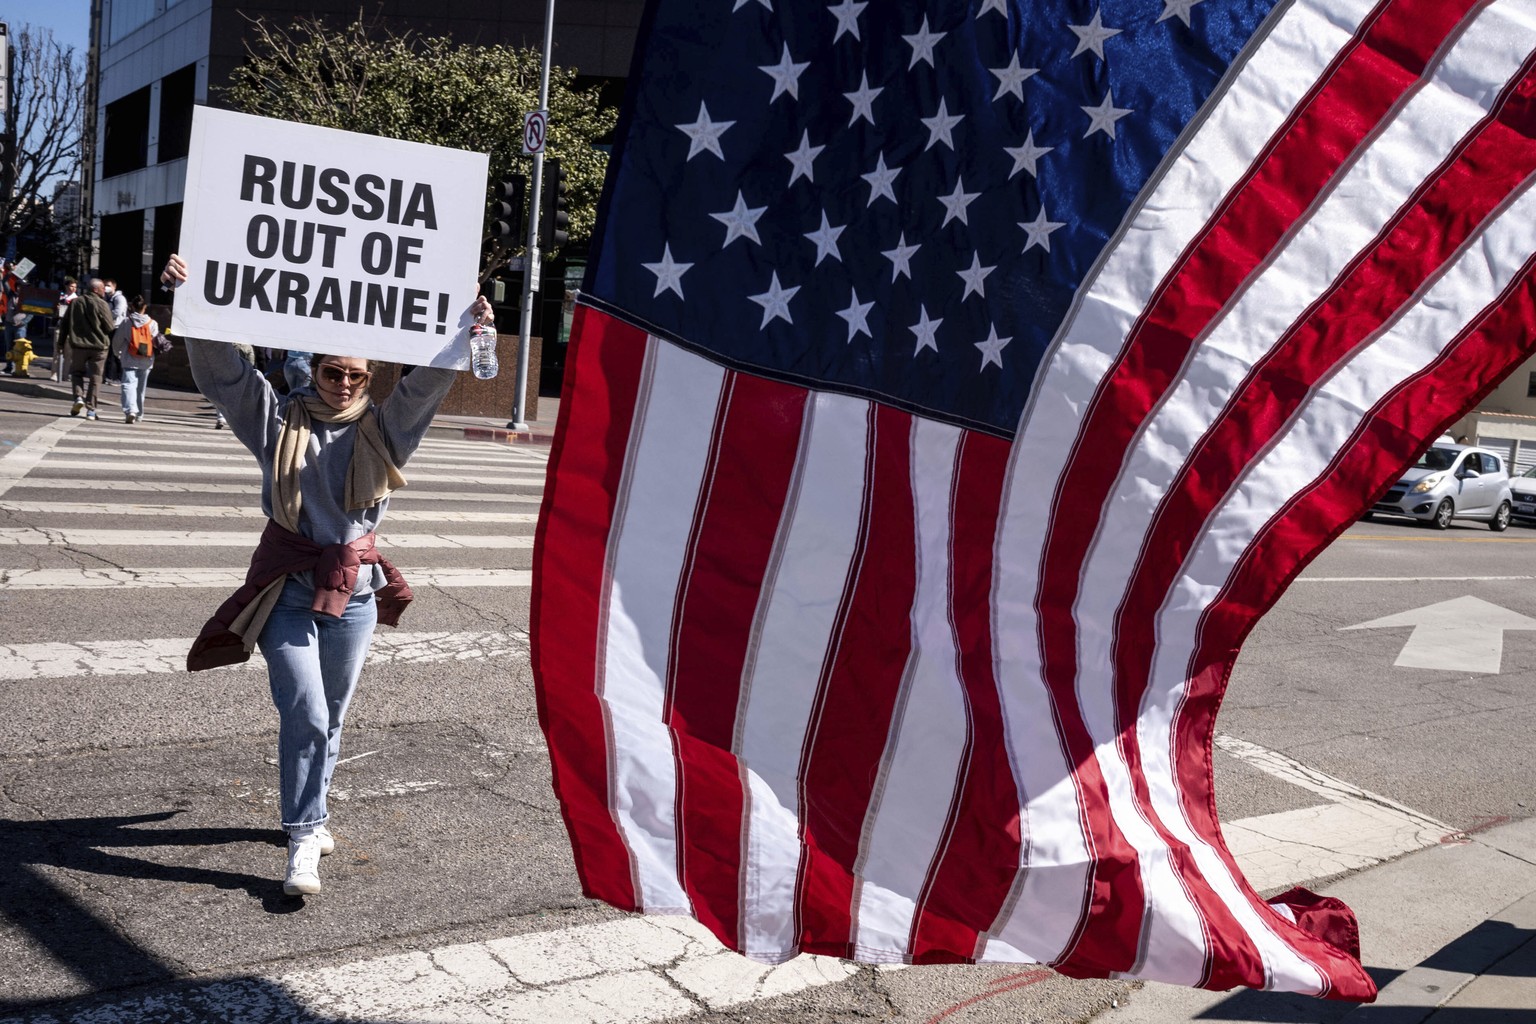 Protestors calling for a stop to the Russian invasion of Ukraine appeal to motorists outside of the federal building in Los Angeles Thursday, Feb. 24, 2022. (David Crane/The Orange County Register via ...